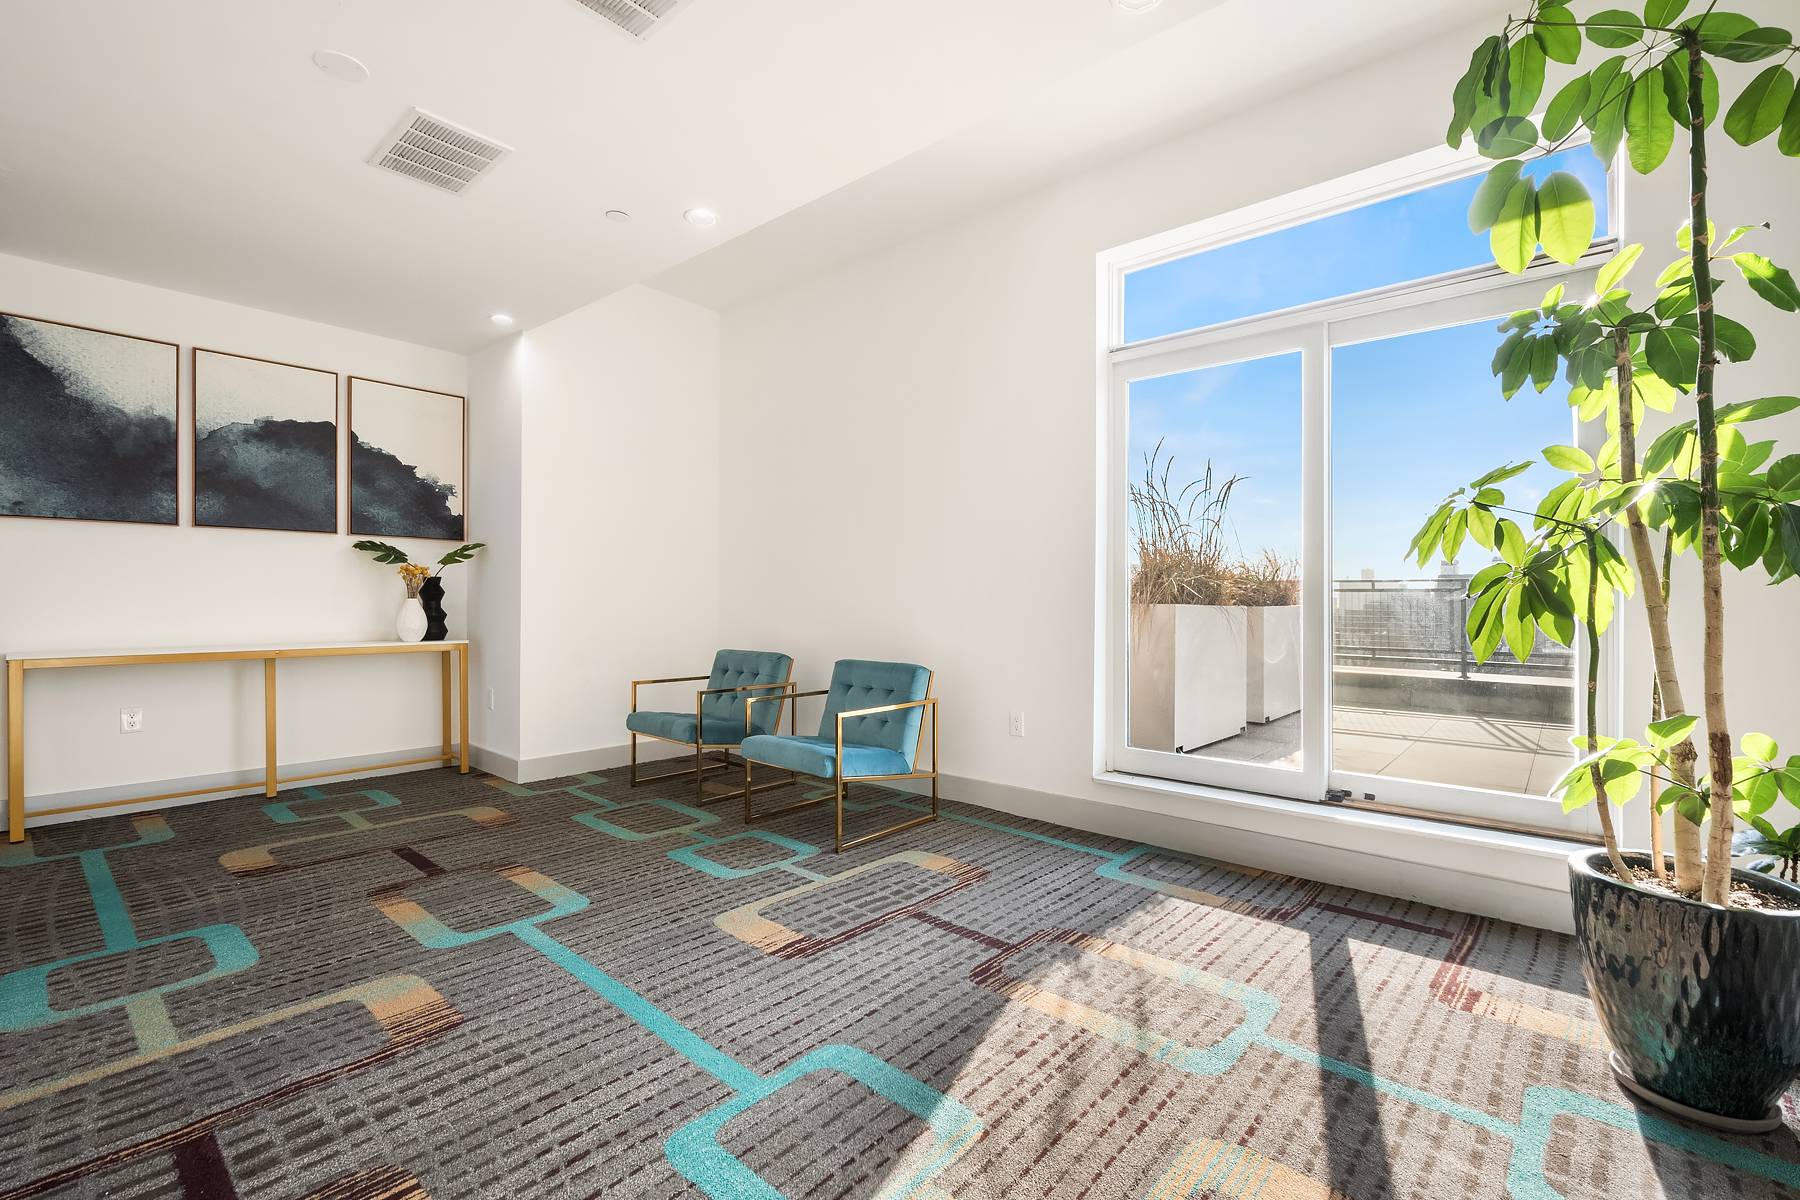 This spacious and bright one bedroom, one bathroom condominium welcomes you home with stunning designer finishes, a terrace and balcony and great amenities, including onsite parking.